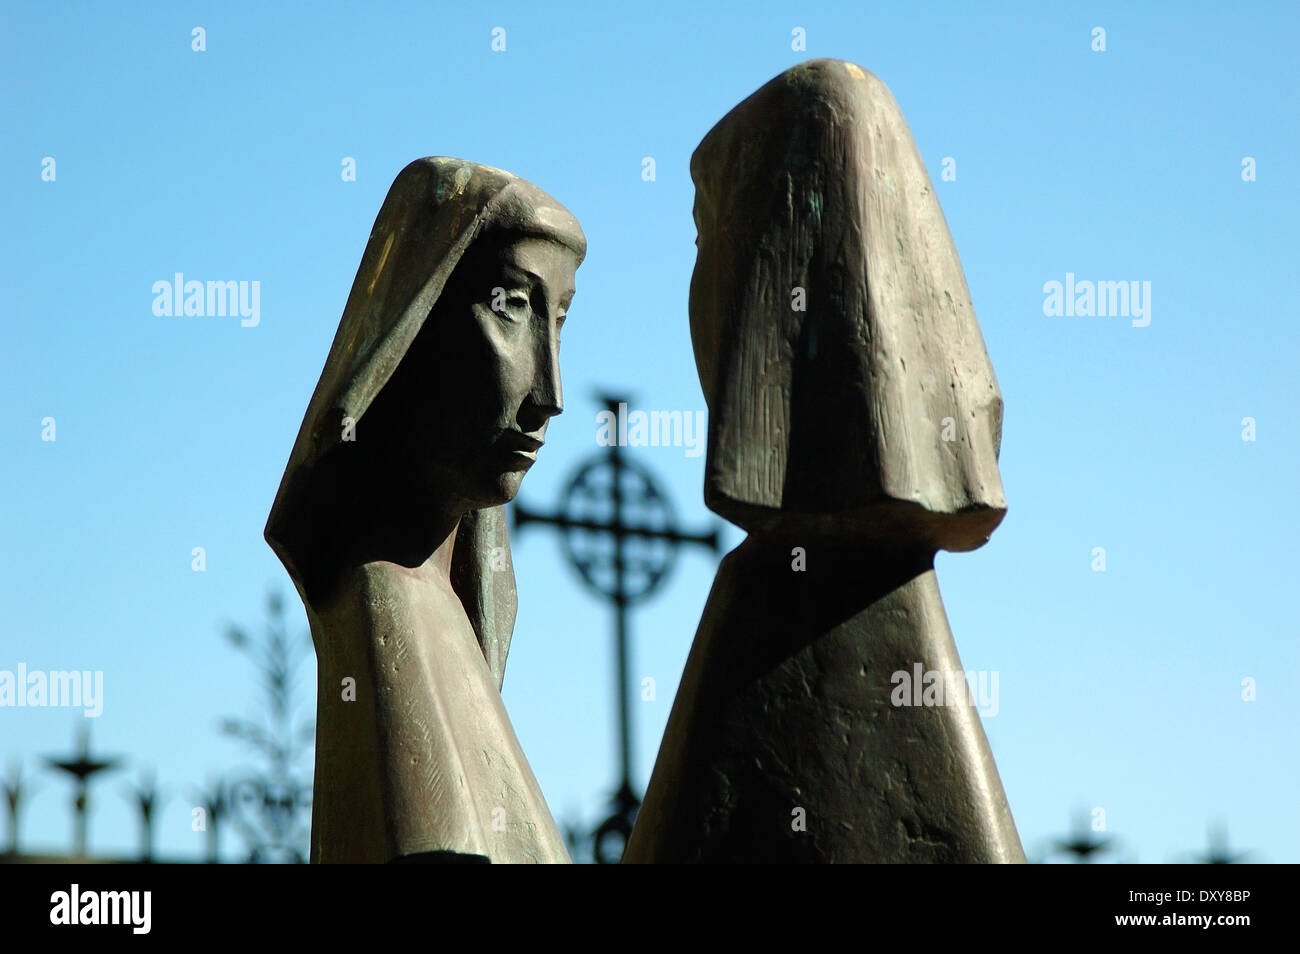 sculpture in the Church of the visitation, Ein karem, Israel Stock Photo